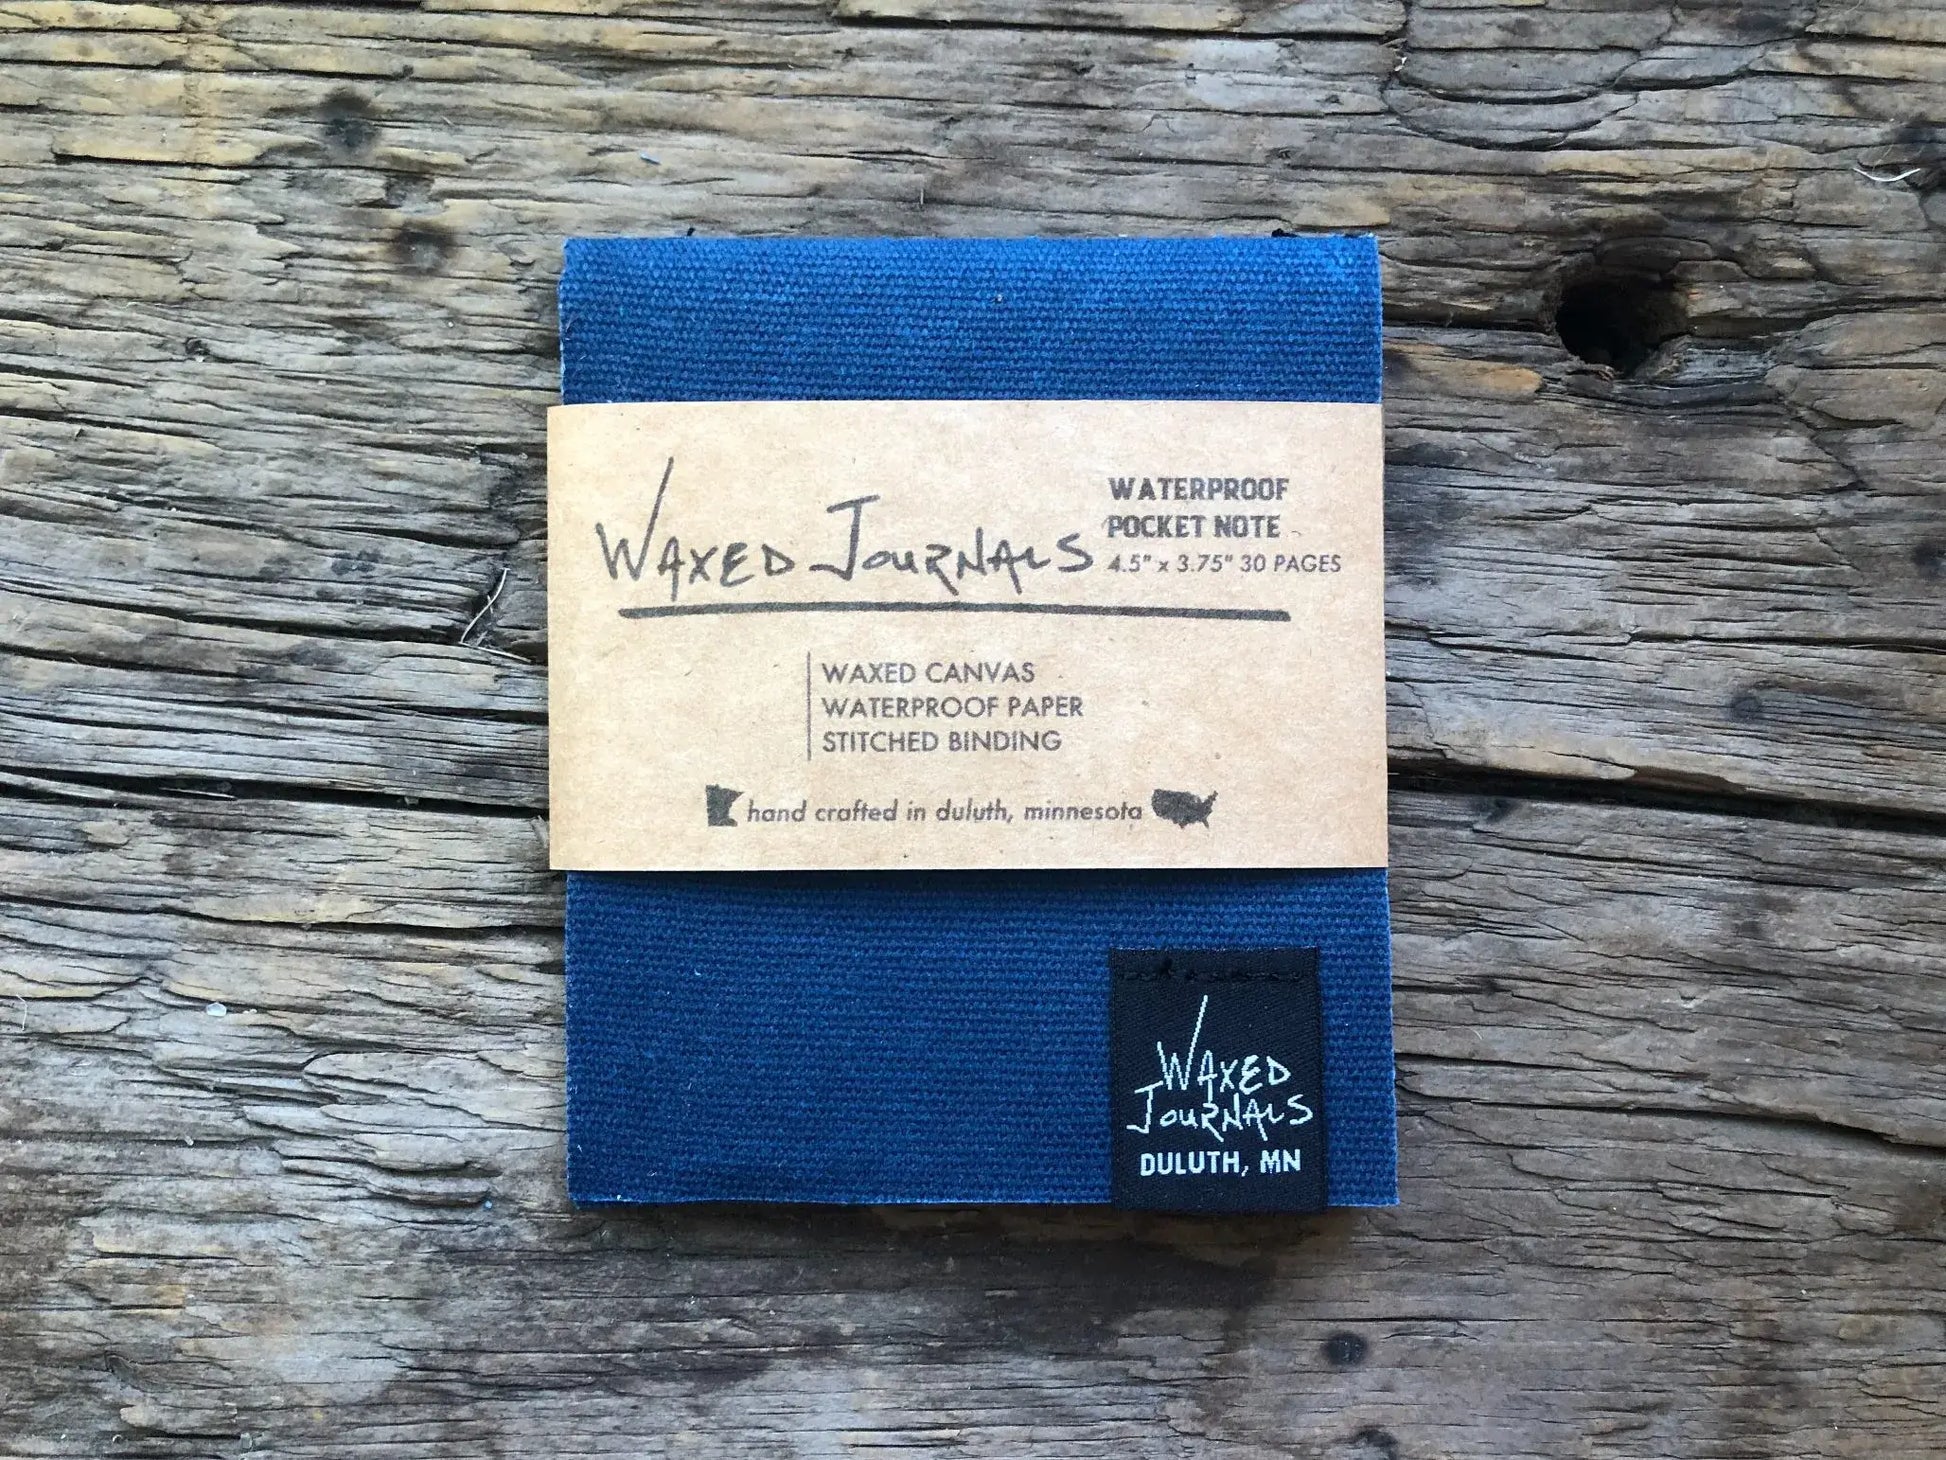 Blue waxed journal notepad with packaging on wood.